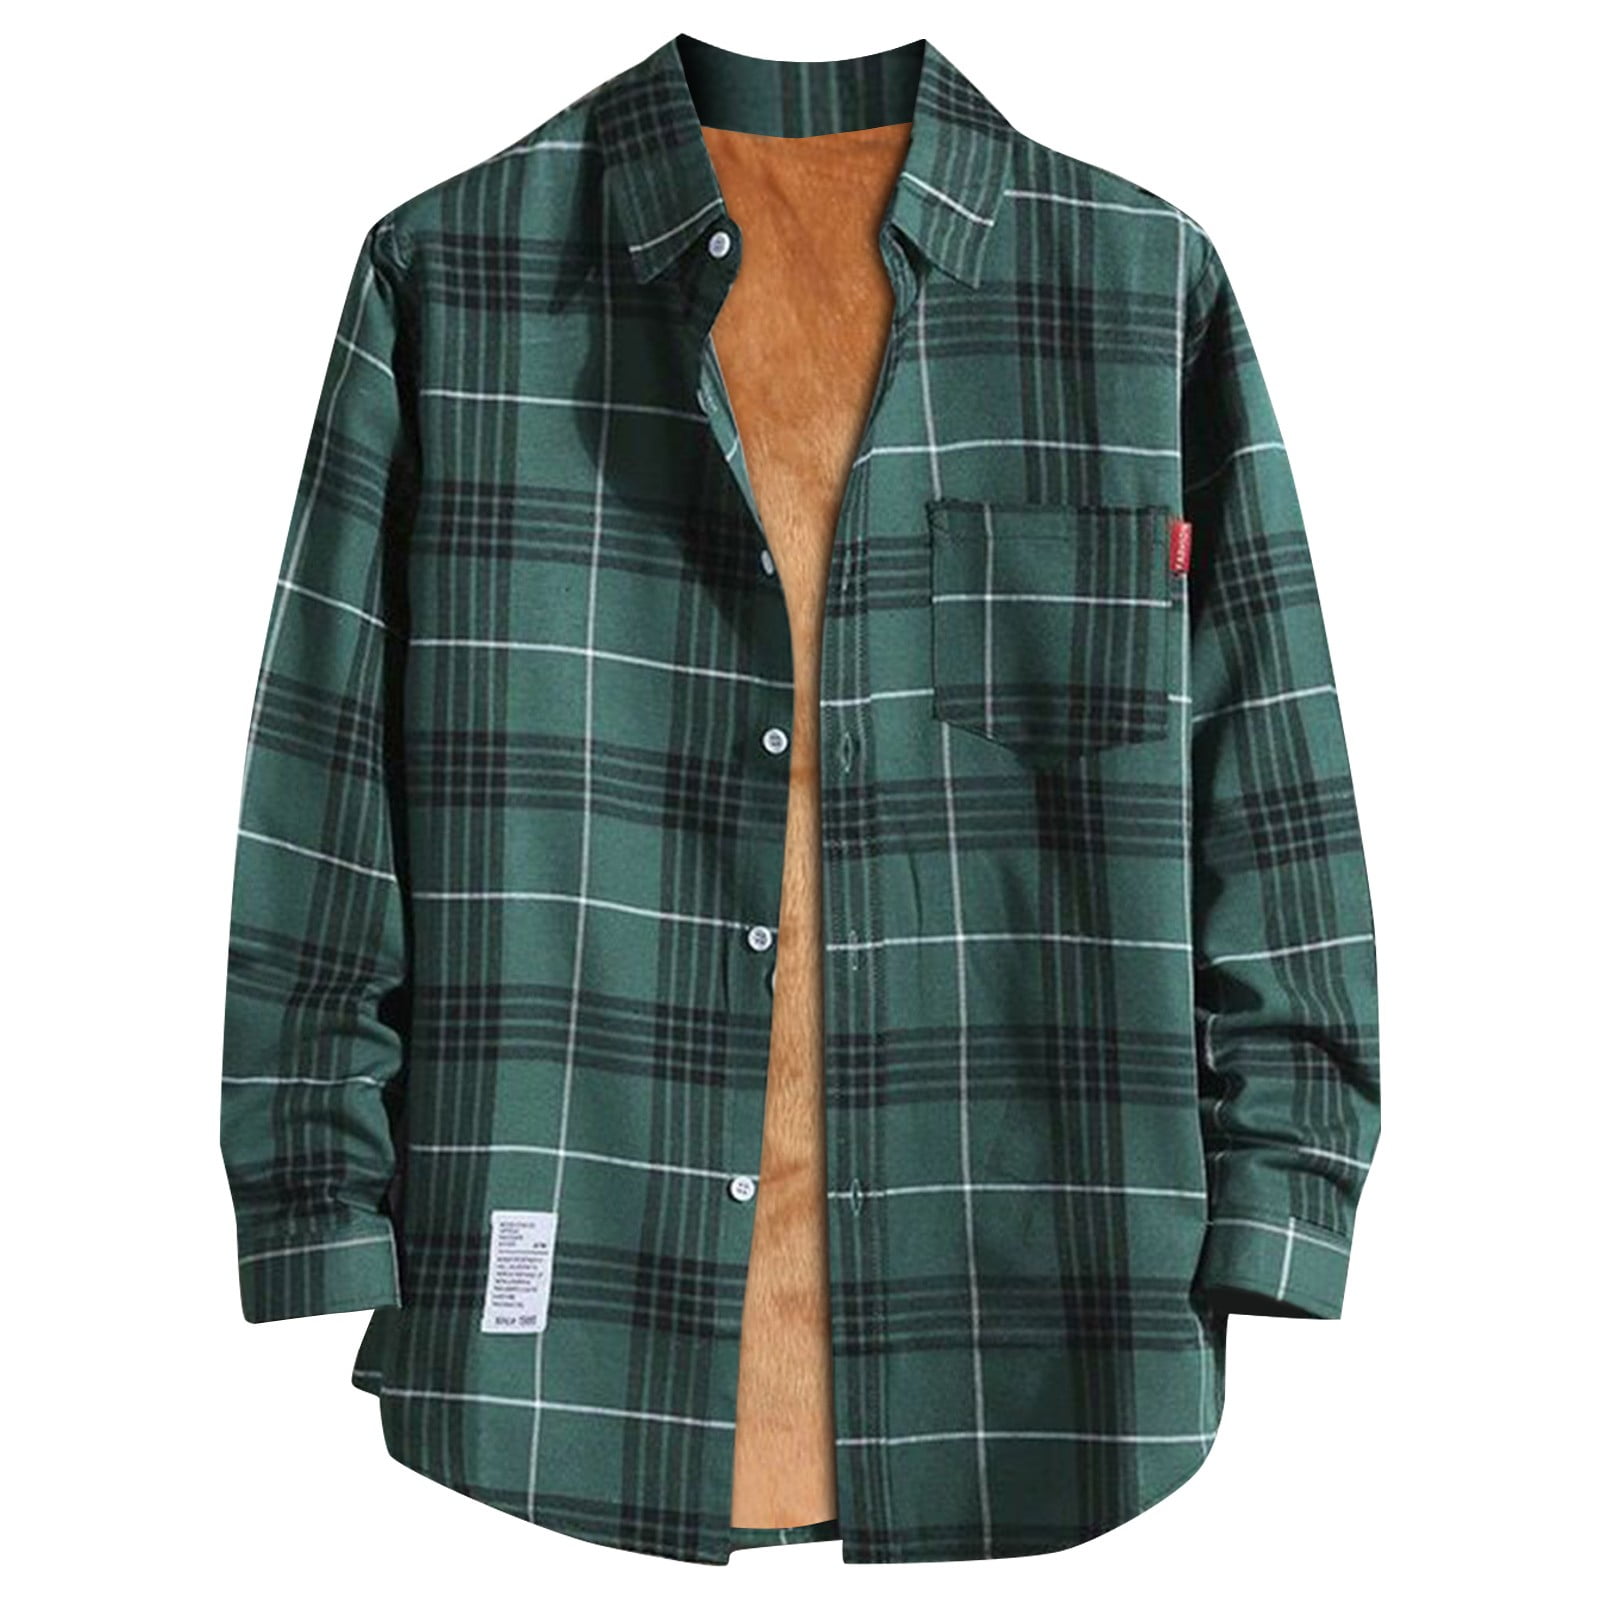 Men's Sherpa Lined Flannel Shirt Jacket, Soft Long Sleeve Rugged Plaid ...